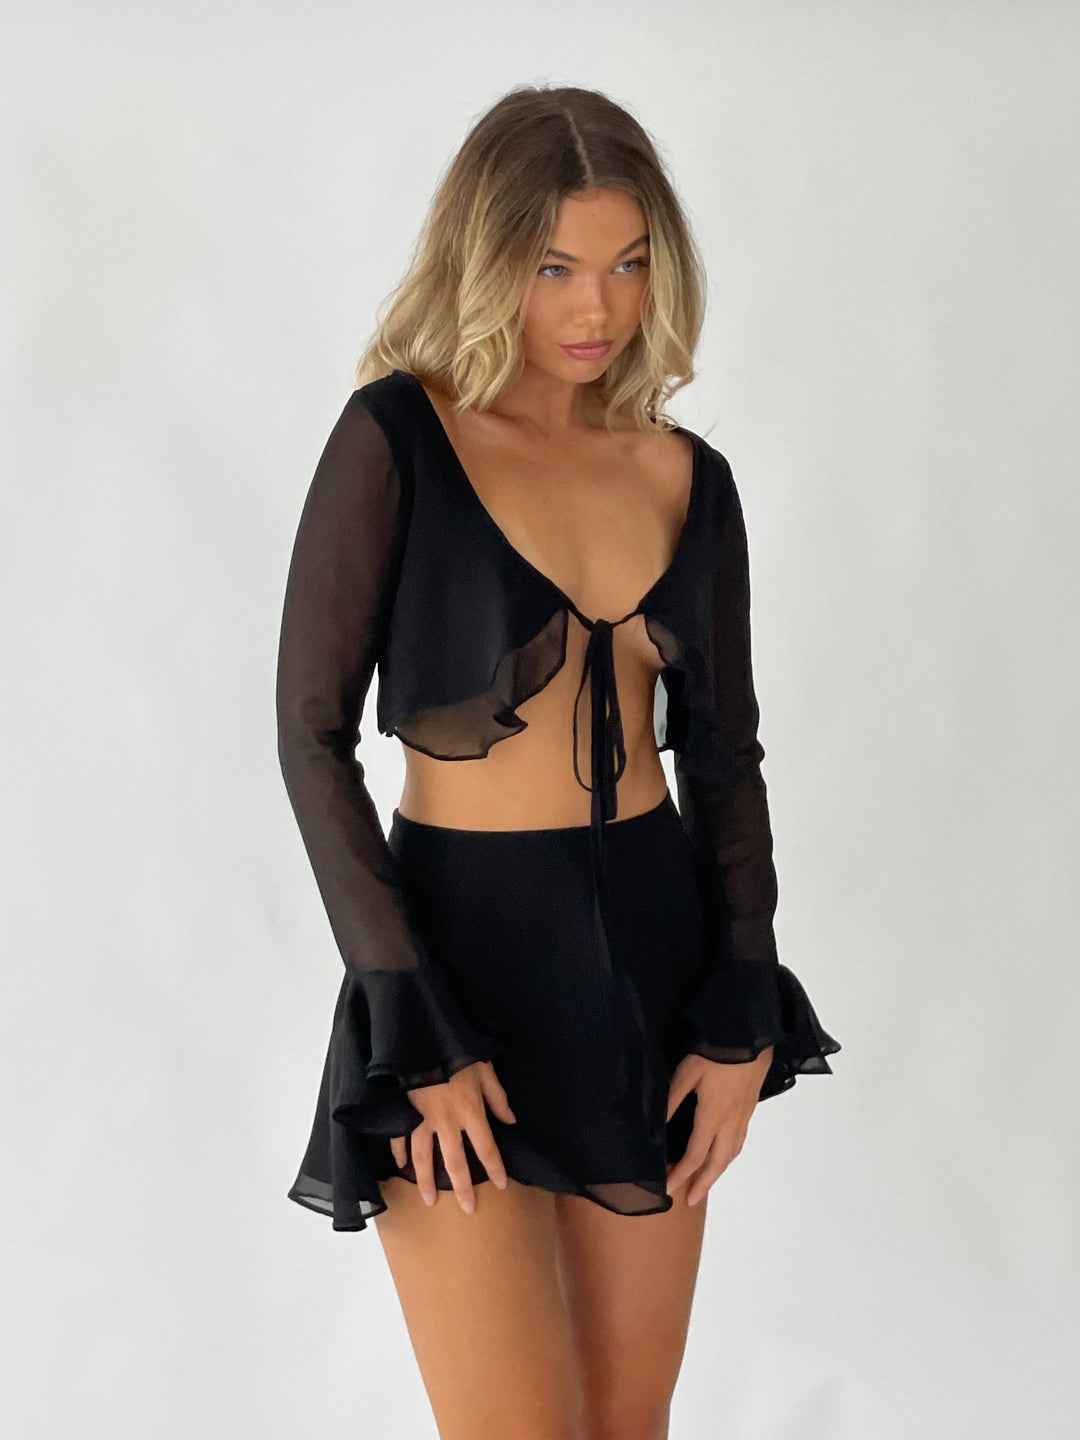 Silk cami sheer top front- top is black and has a lined (non-sheer)front with double frill sleeves. Skirt is skater style.